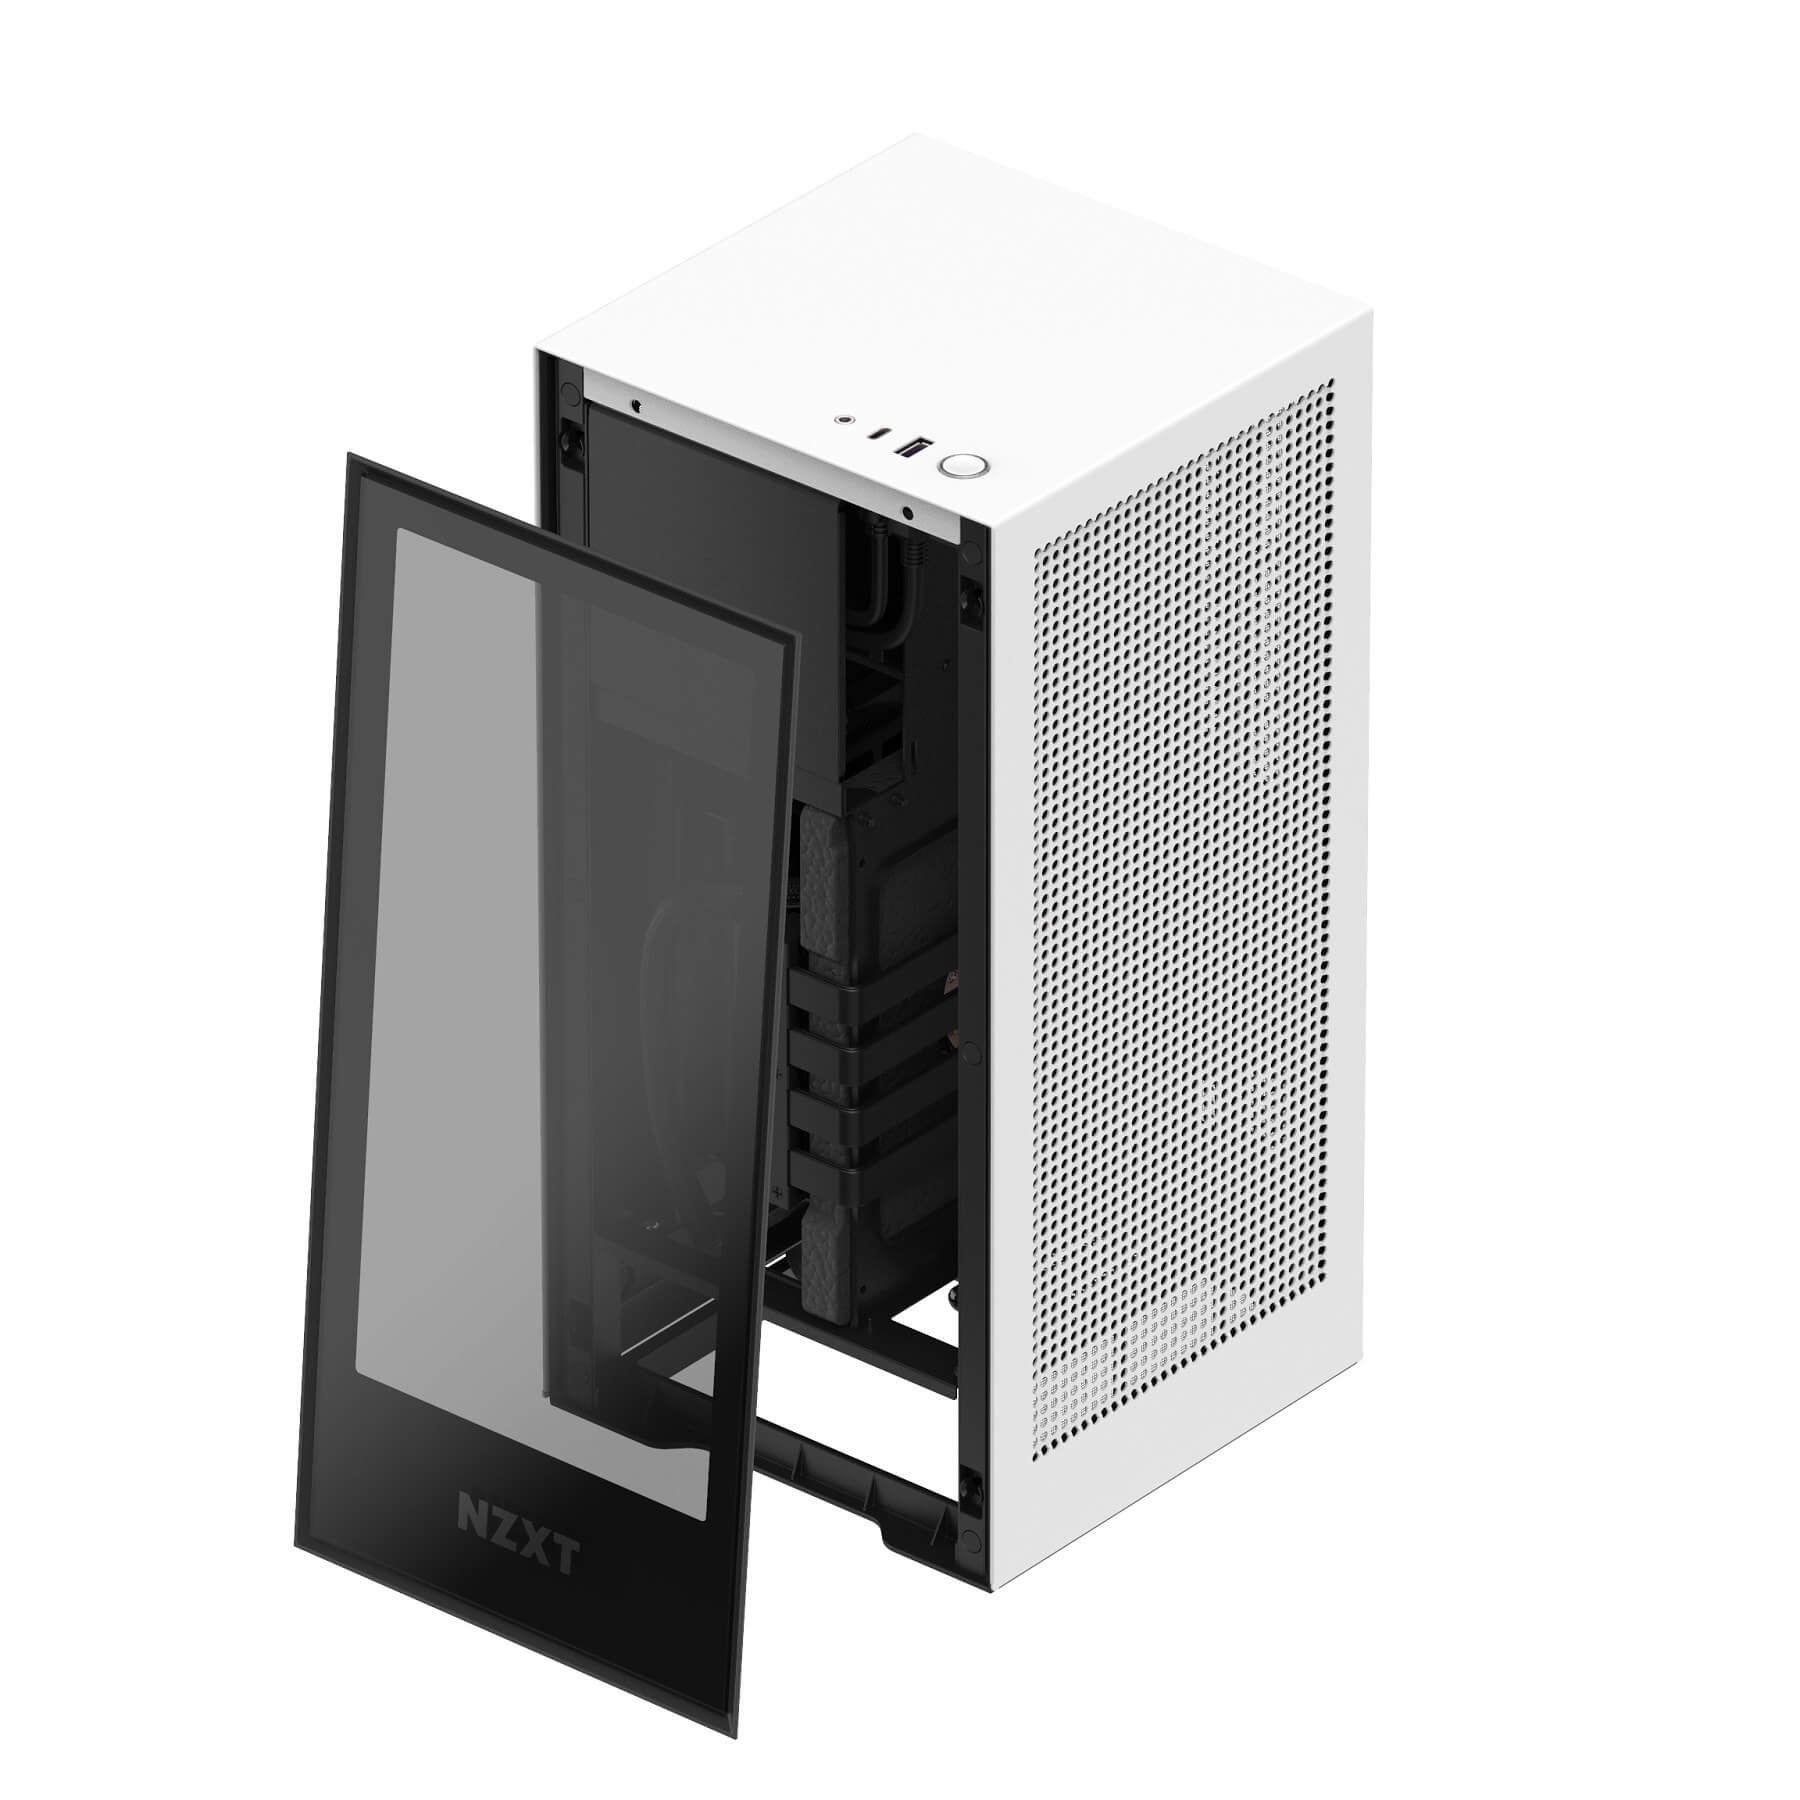 NZXT stops sales of its H1 case after reports of fires